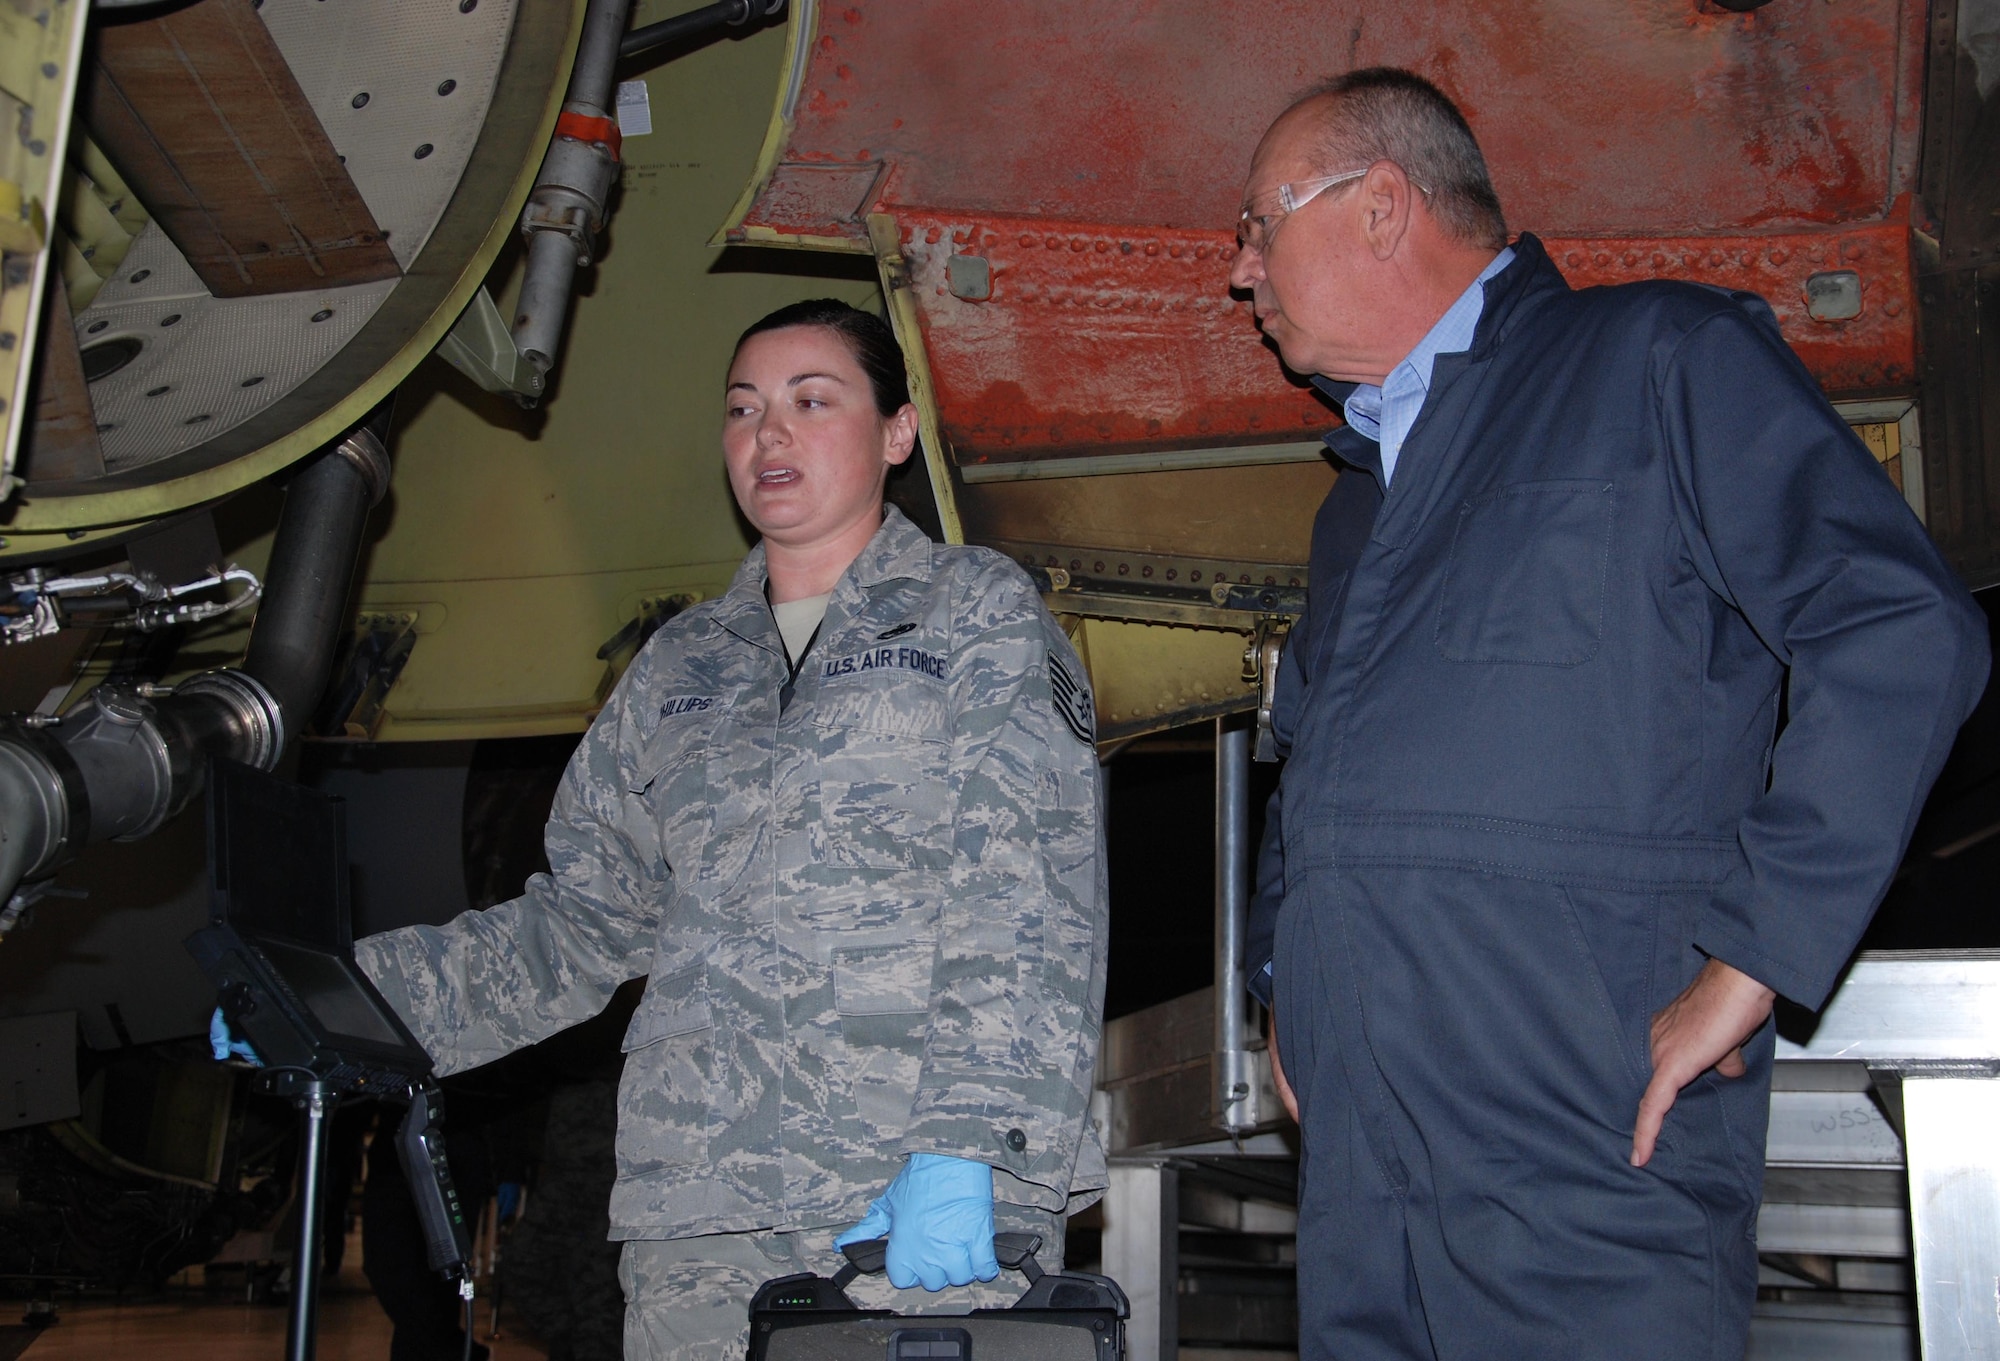 Tech. Sgt. Anne Phillips, 931st Maintenance Squadron jet engine mechanic, discusses her job with one of the 19 Air Mobility Commanders, Nov. 17, 2015, at McConnell Air Force Base, Kan. The tour was an opportunity for the civic leaders to view Team McConnell's aerial refueling mission firsthand. (U.S. Air Force photo by Tech. Sgt. Abigail Klein)